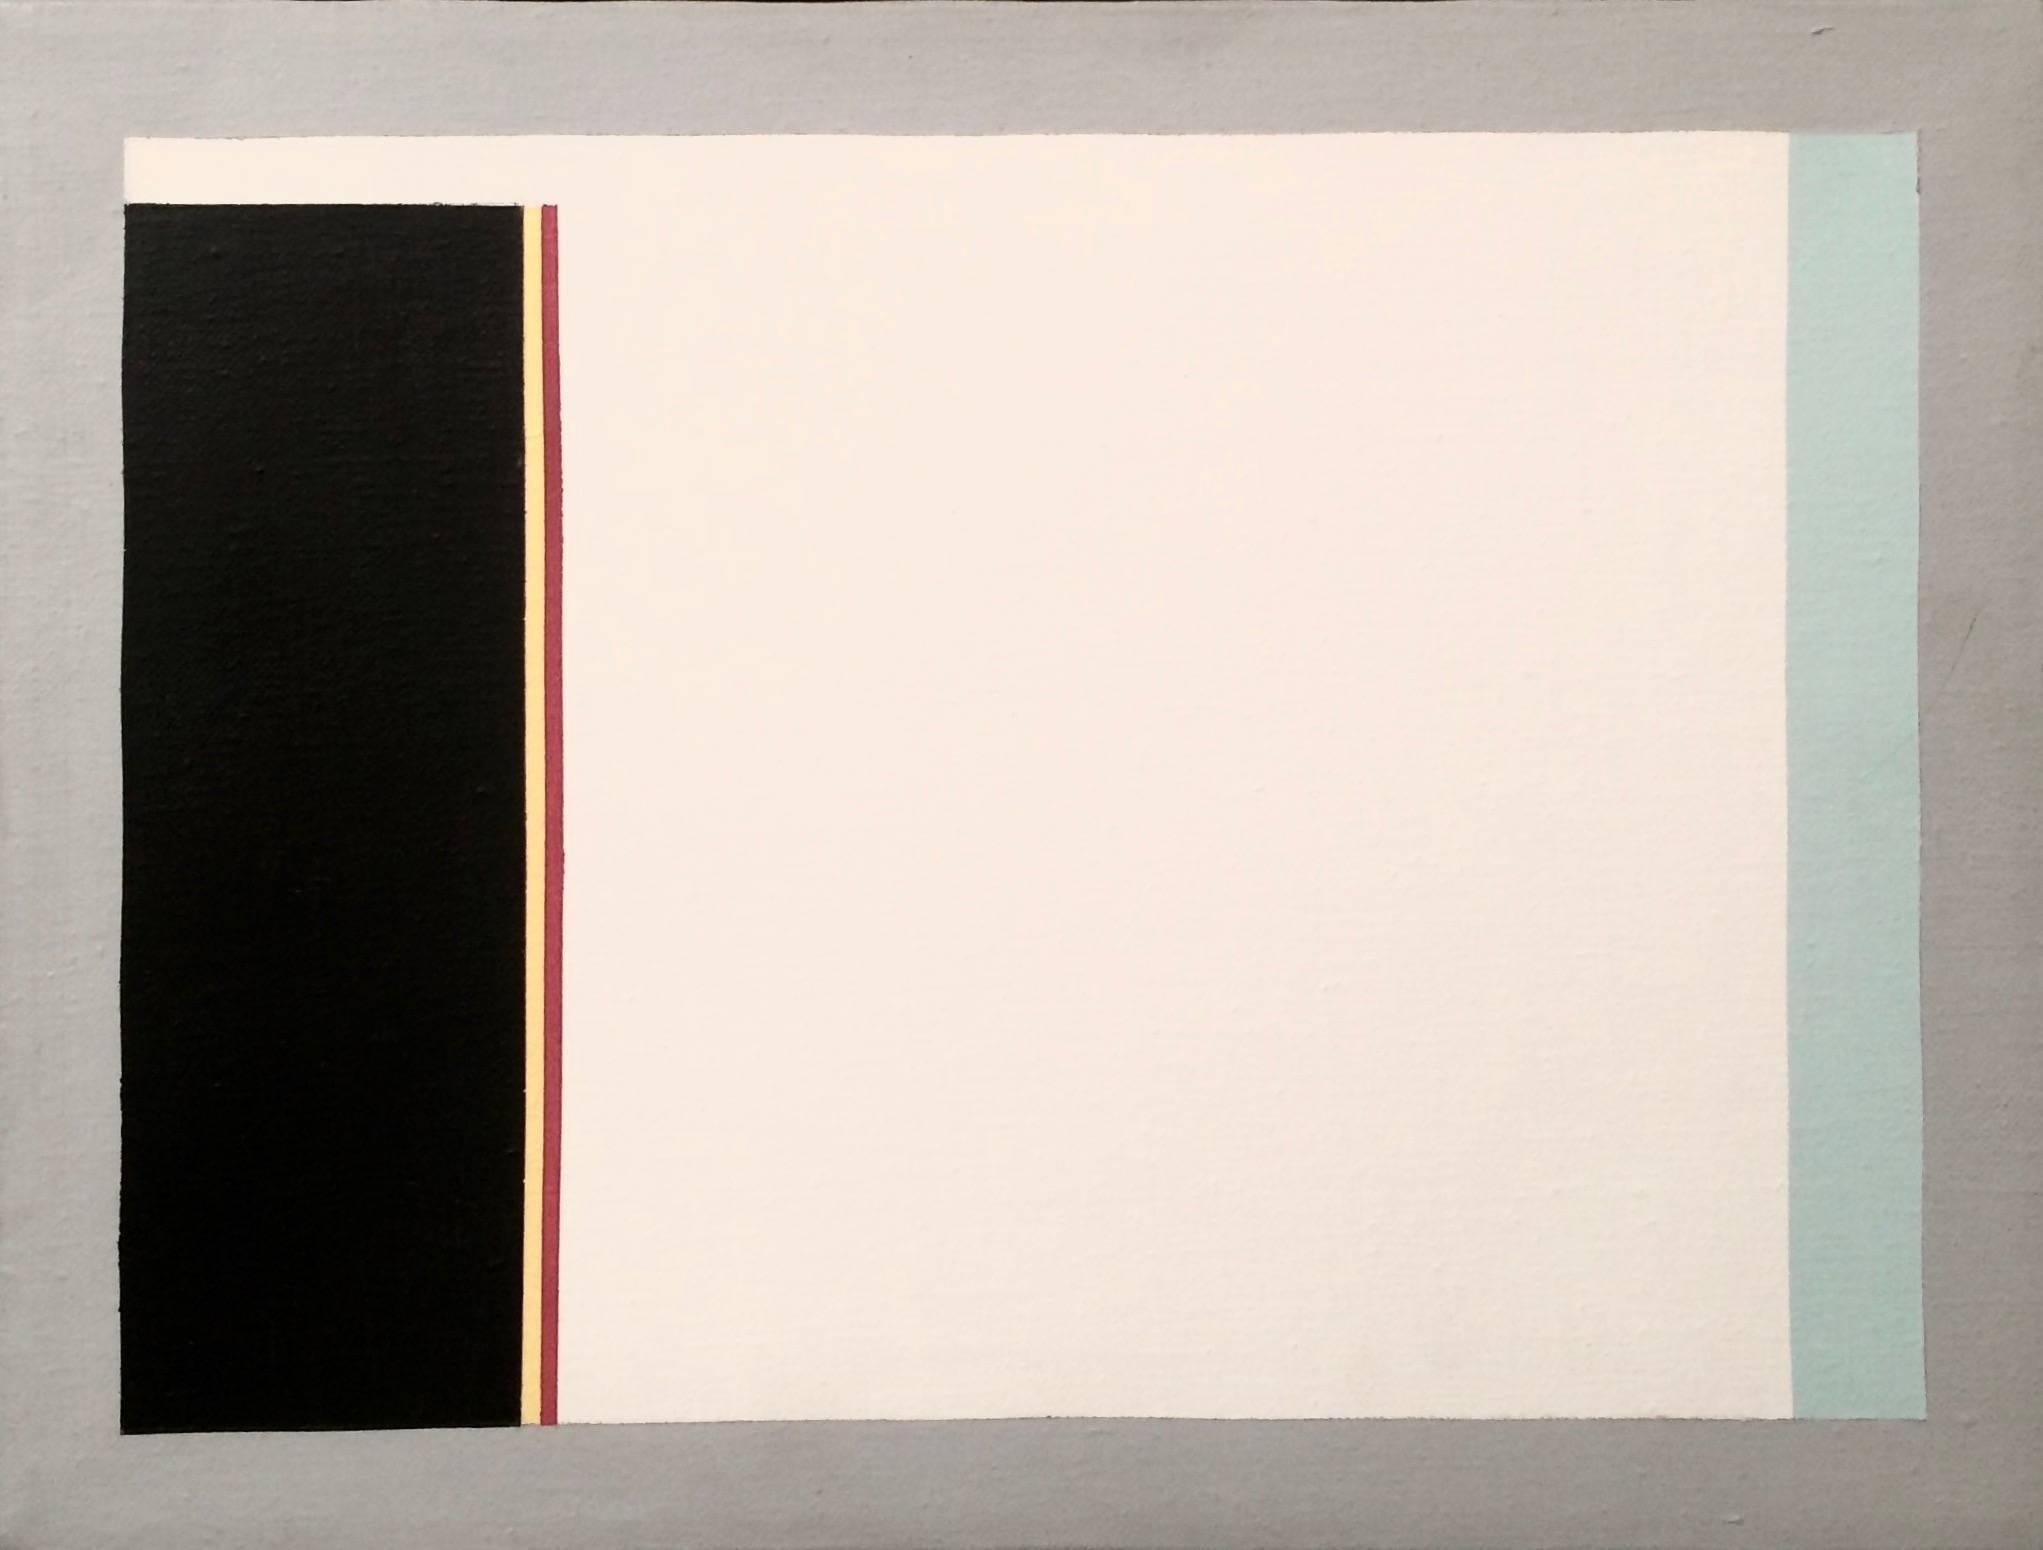 Gene Davis Abstract Painting - Untitled (1983) - Colorfield Composition - Blue, Red, Black, White & Yellow